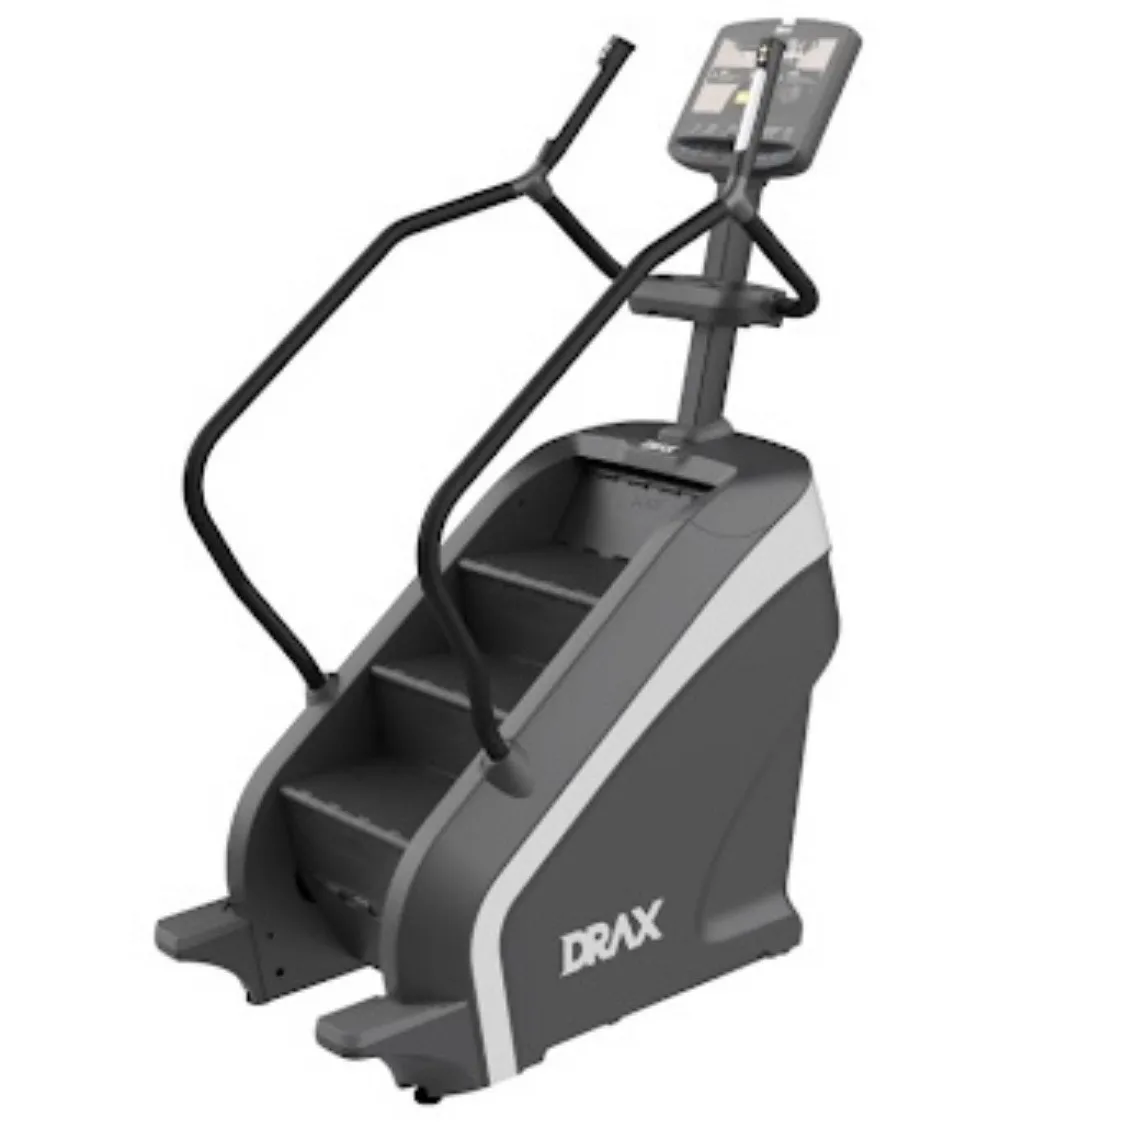 DRAX DSC6X  Commercial StepMill Stair Climber-New.Call Now for Lowest Price In Nation